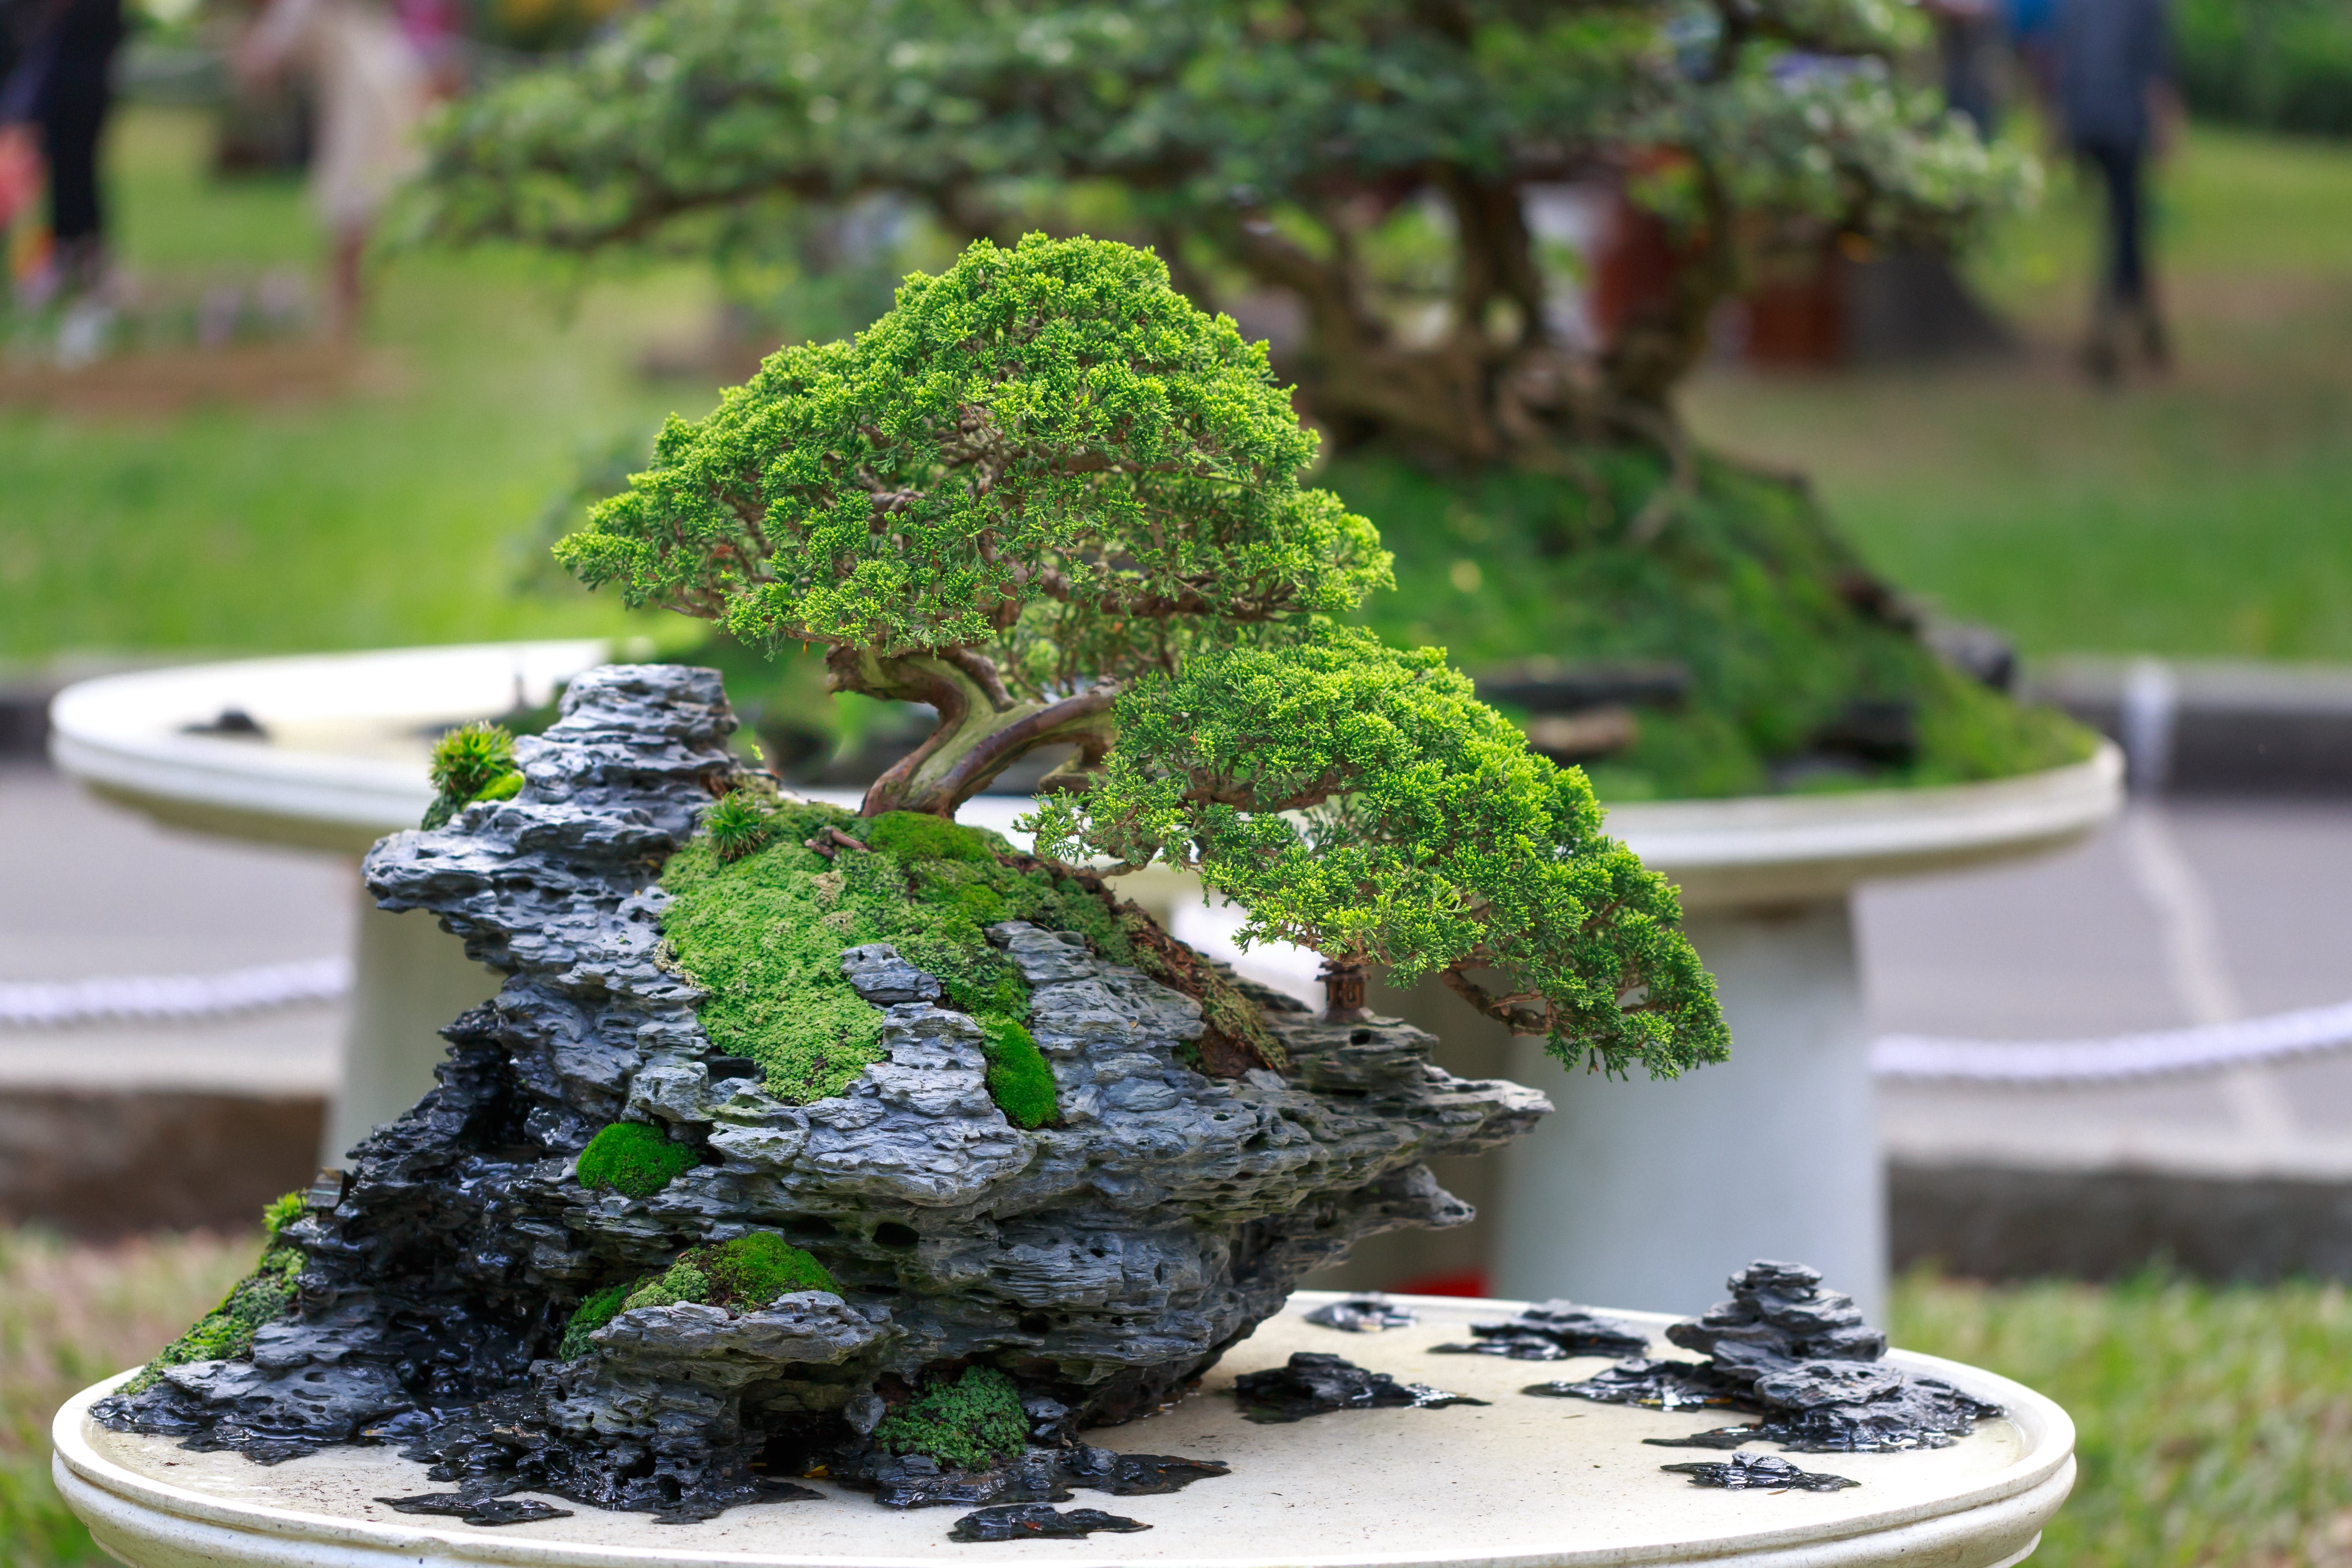 The Complete Practical Encyclopedia of Bonsai Reviews